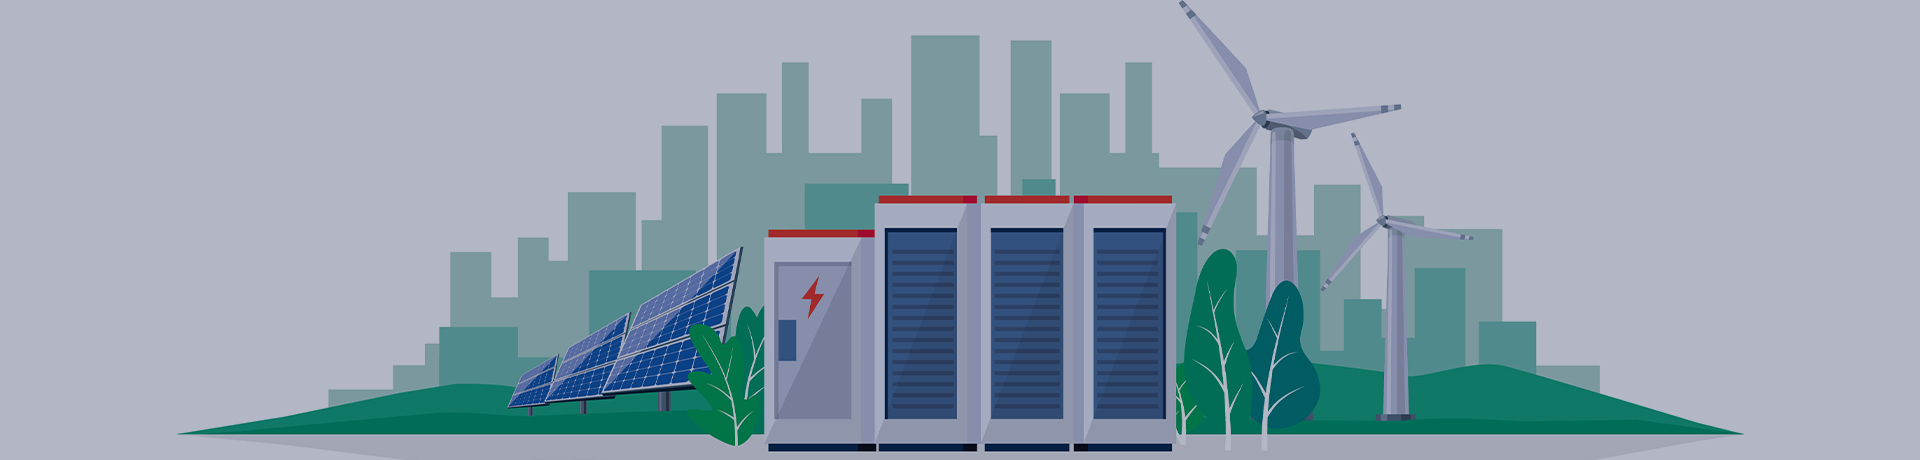 Vector illustration of a large rechargeable lithium-ion battery energy storage station and a renewable power plant with solar panels and wind turbines. Backup energy storage system. ©petovarga shutterstock 1670095636